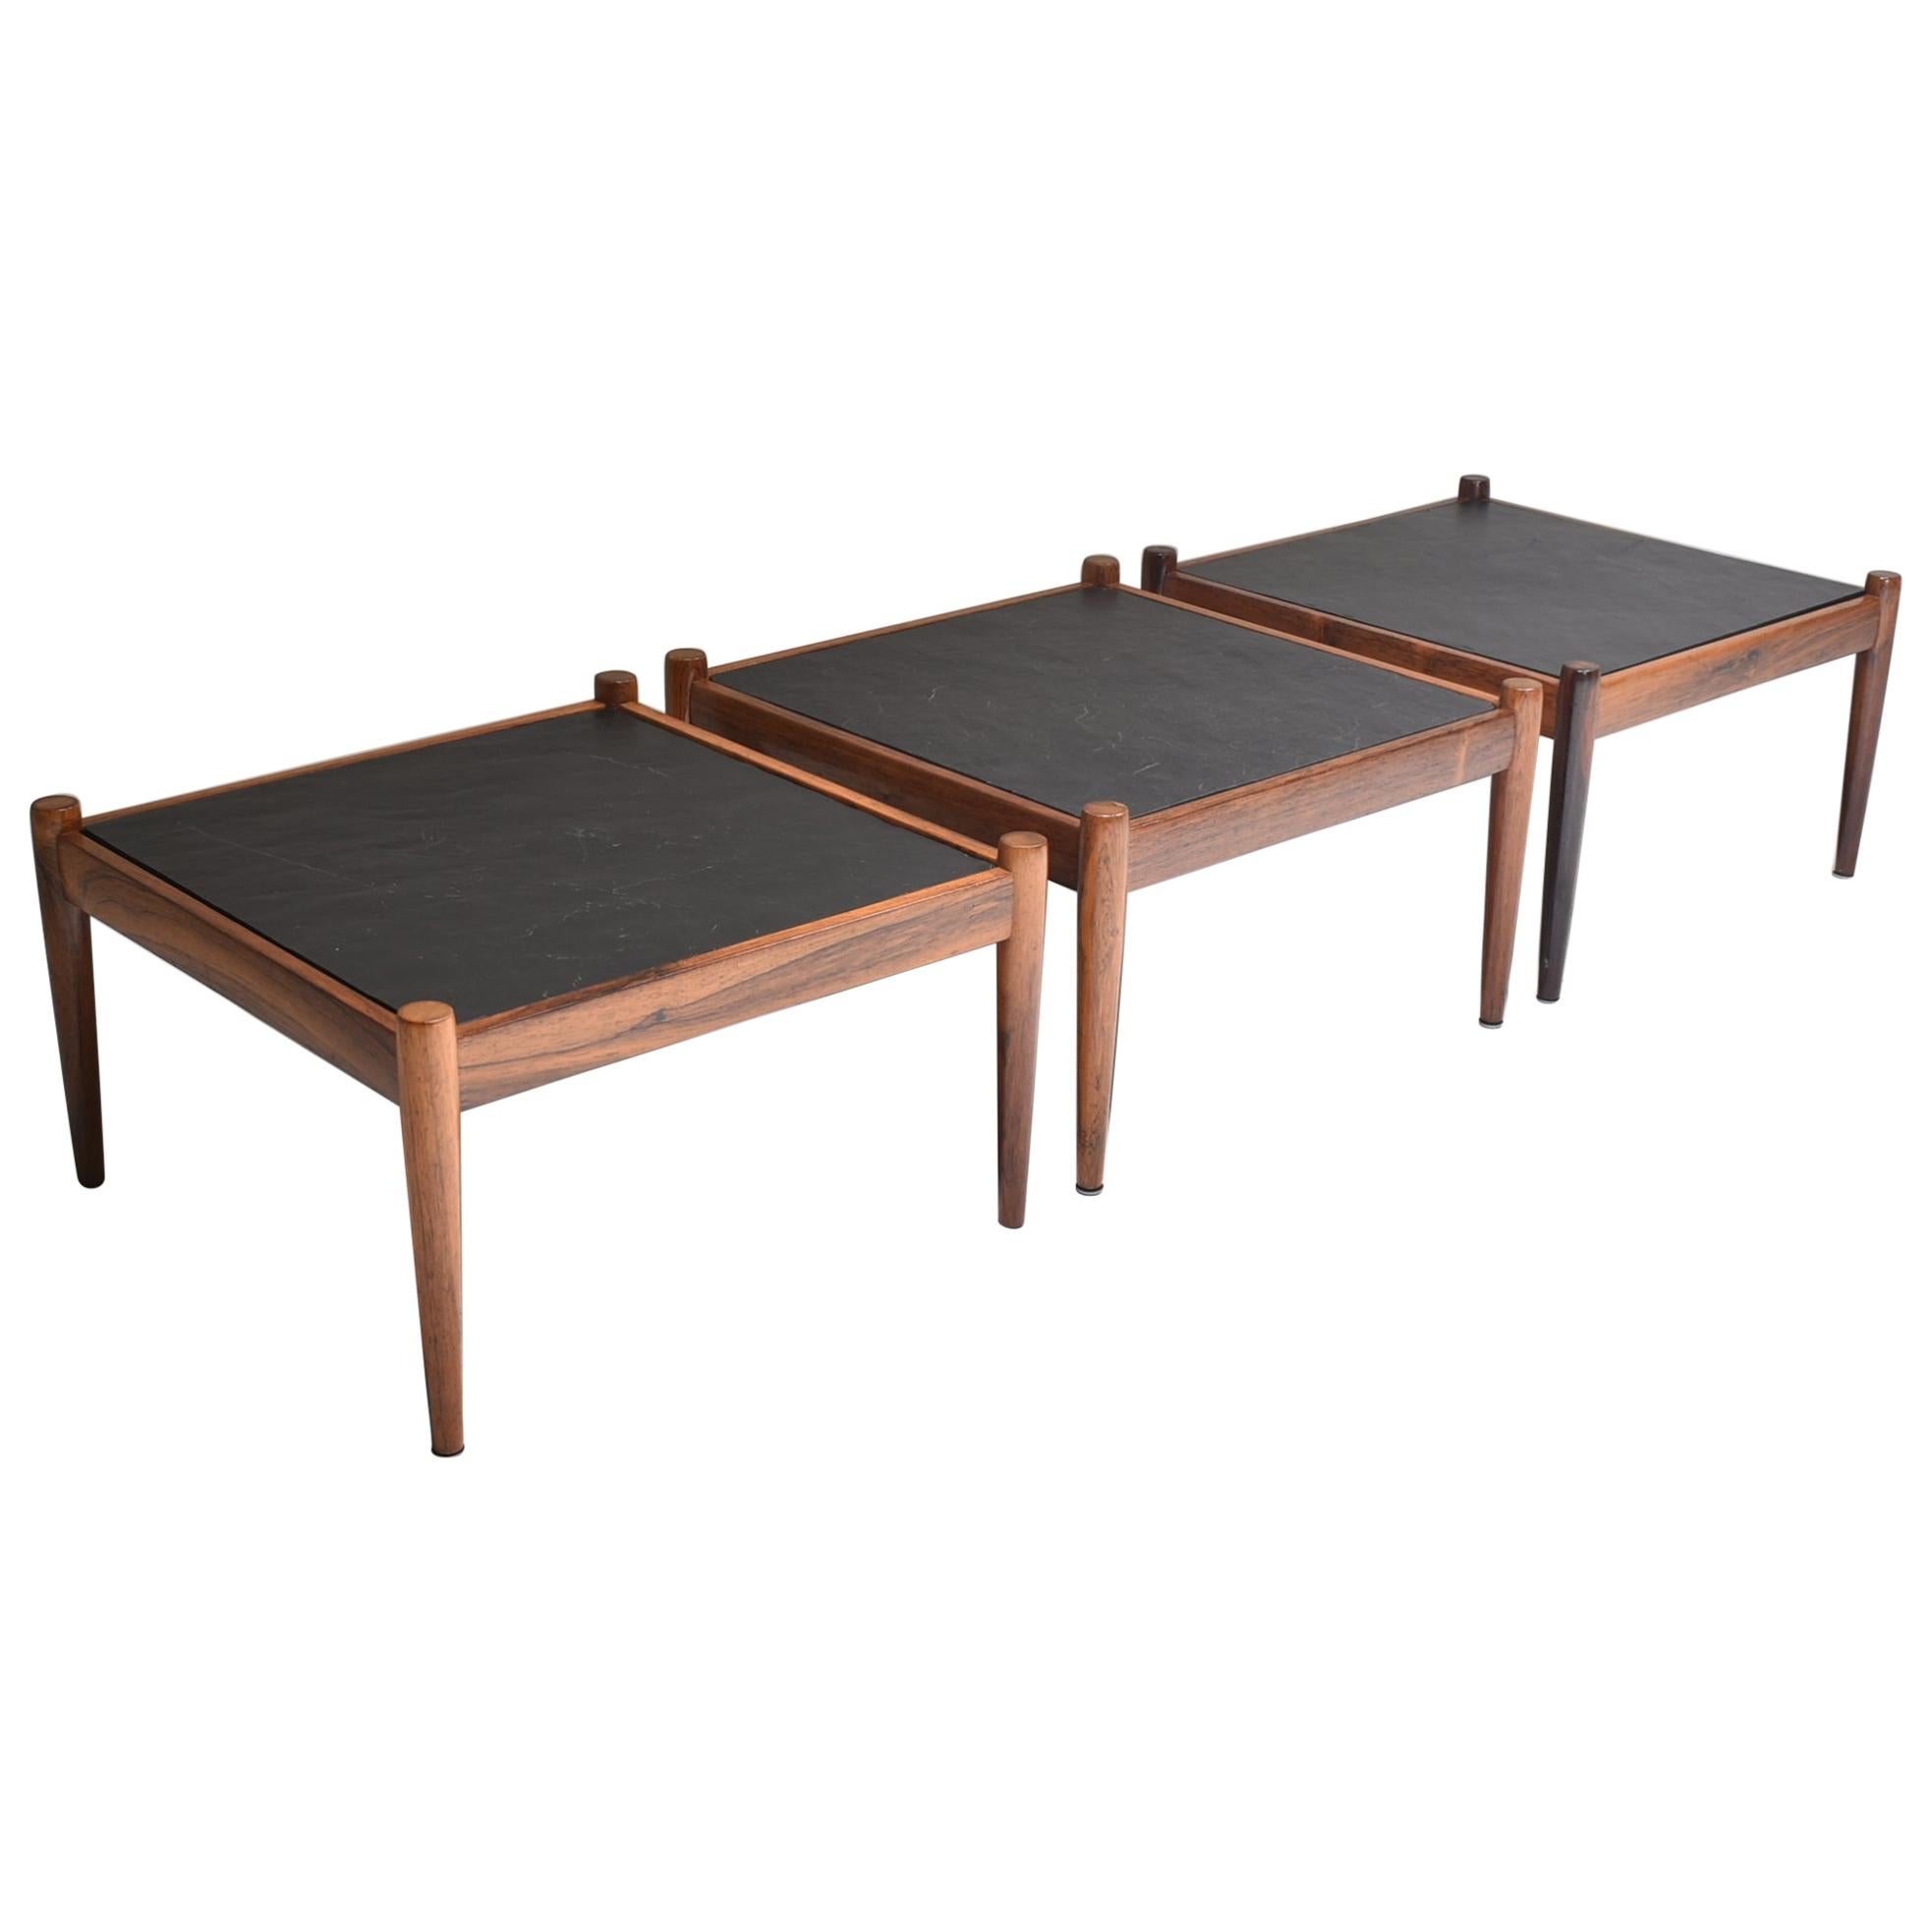 Set of Three Slate and Rosewood Coffee Tables "Universe" by Kai Kristiansen 1960 For Sale